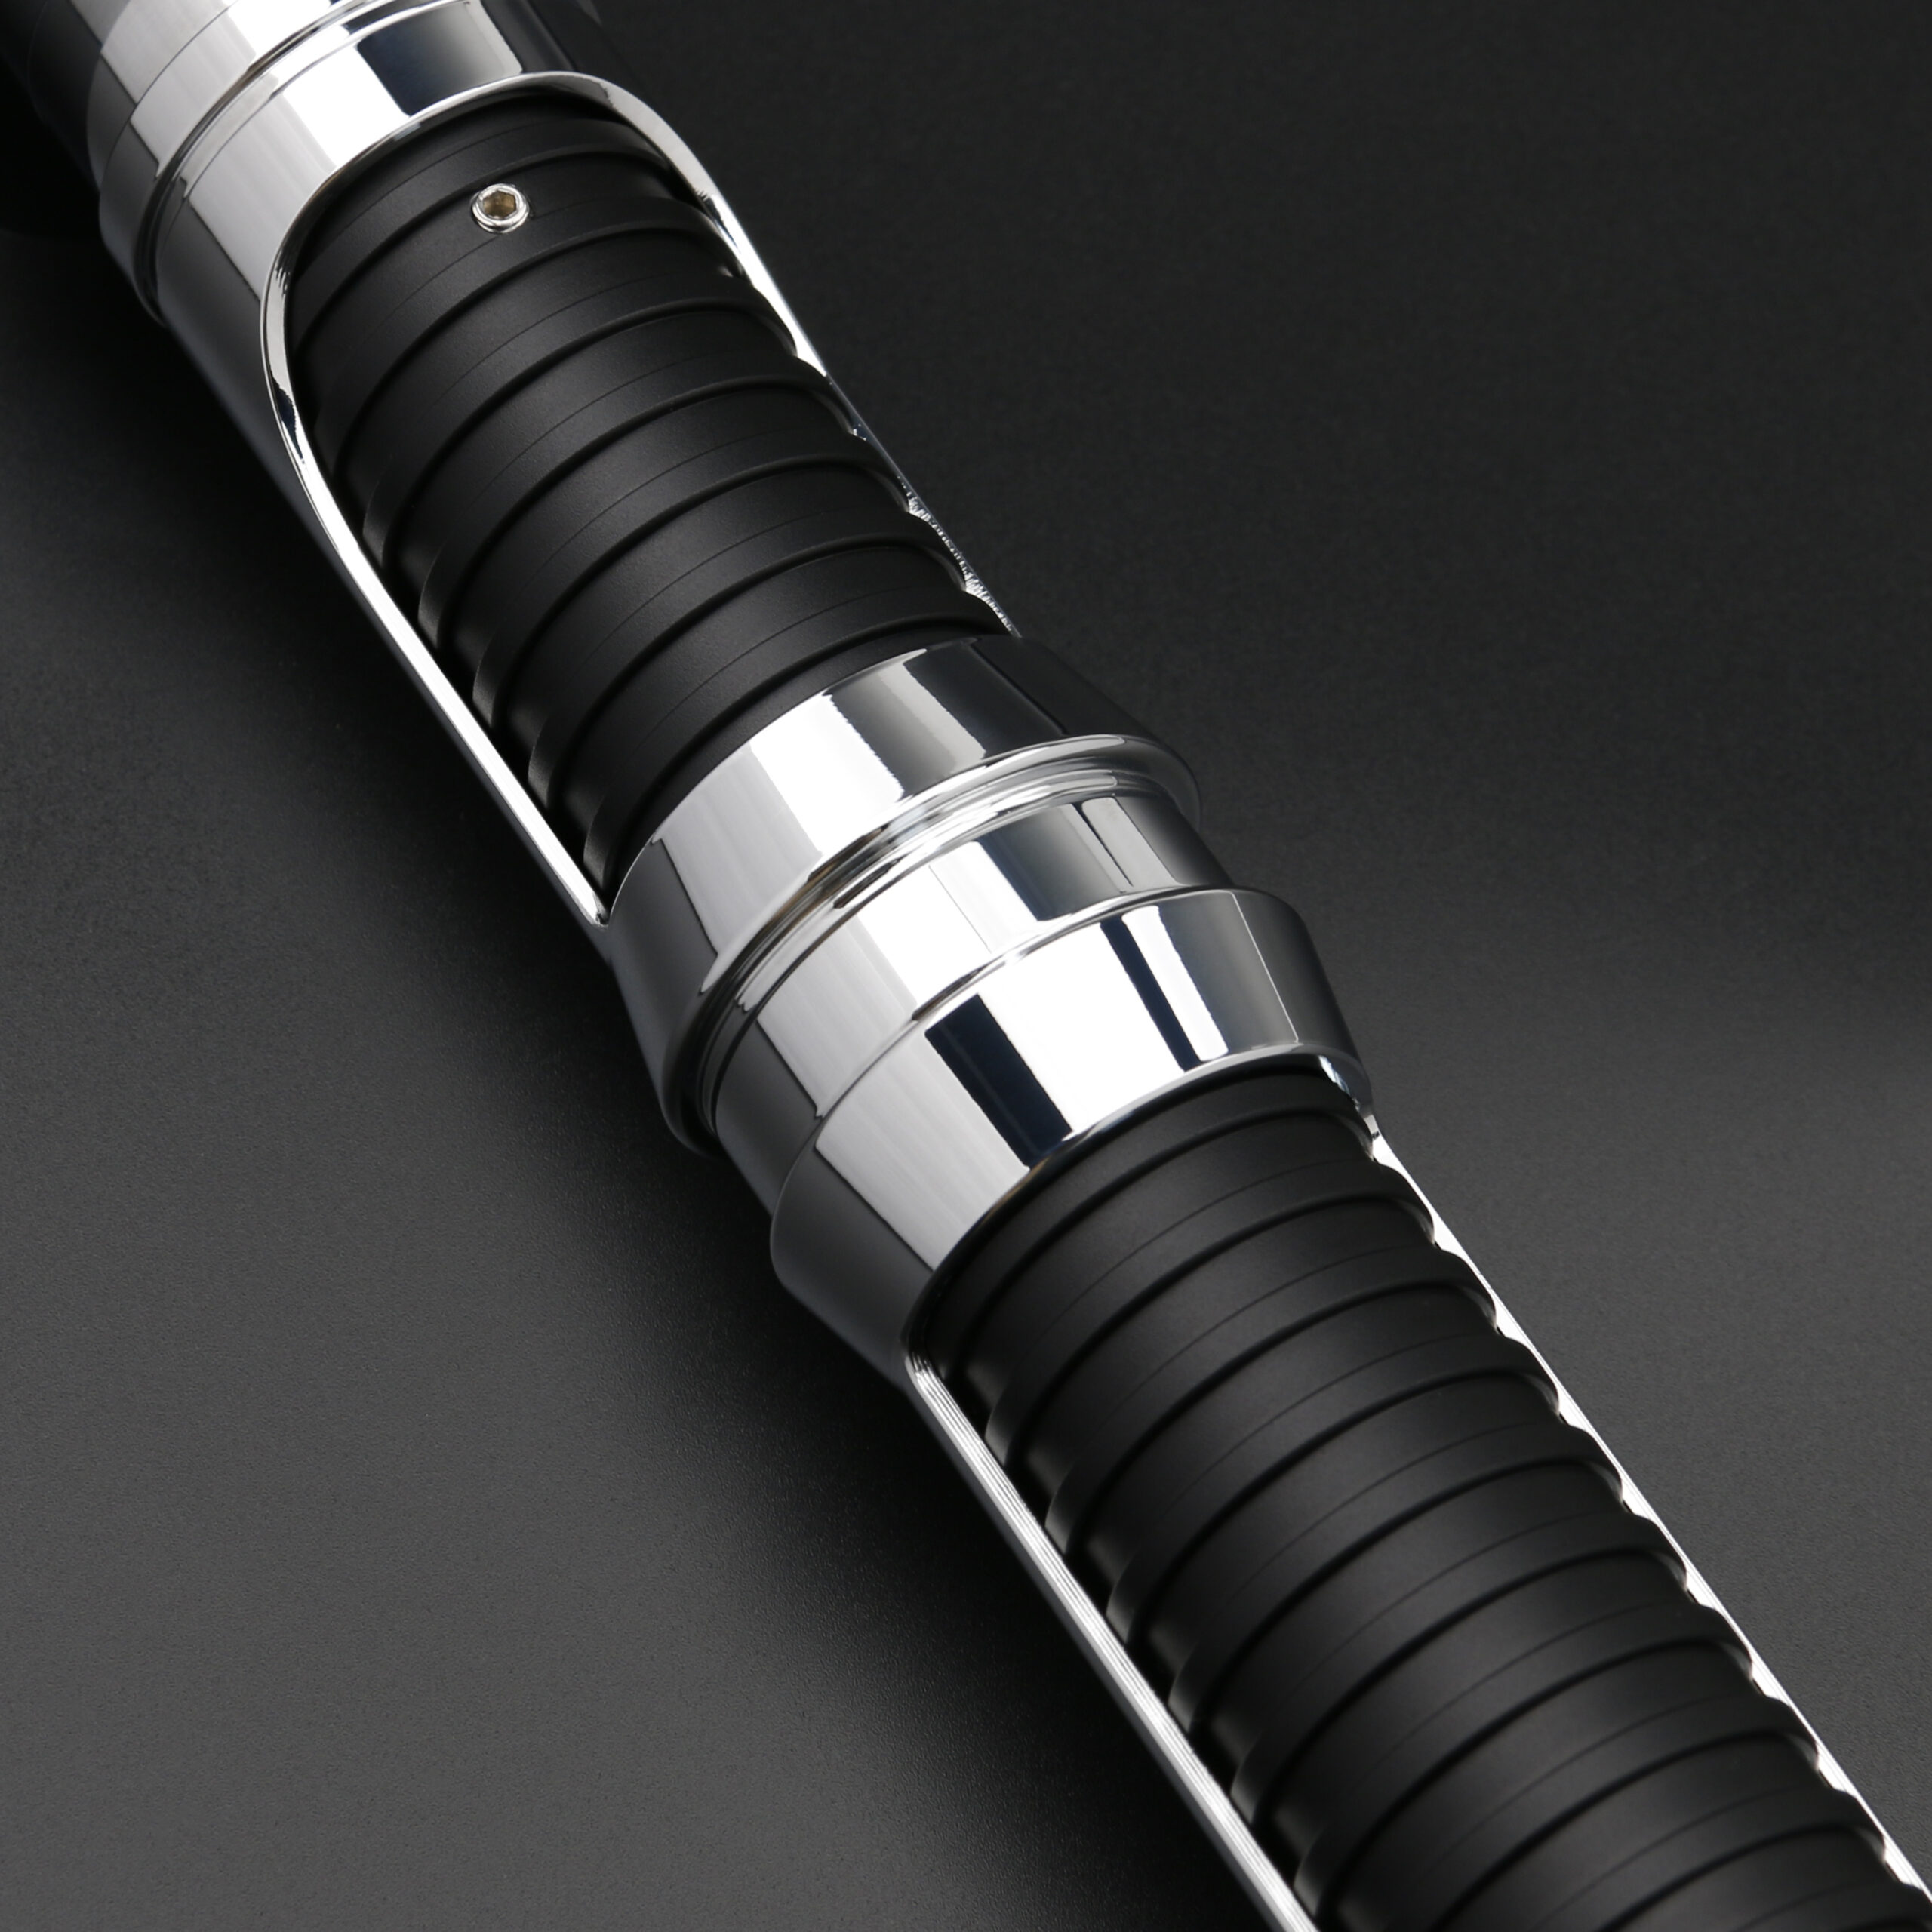 Sithious dueling lightsaber